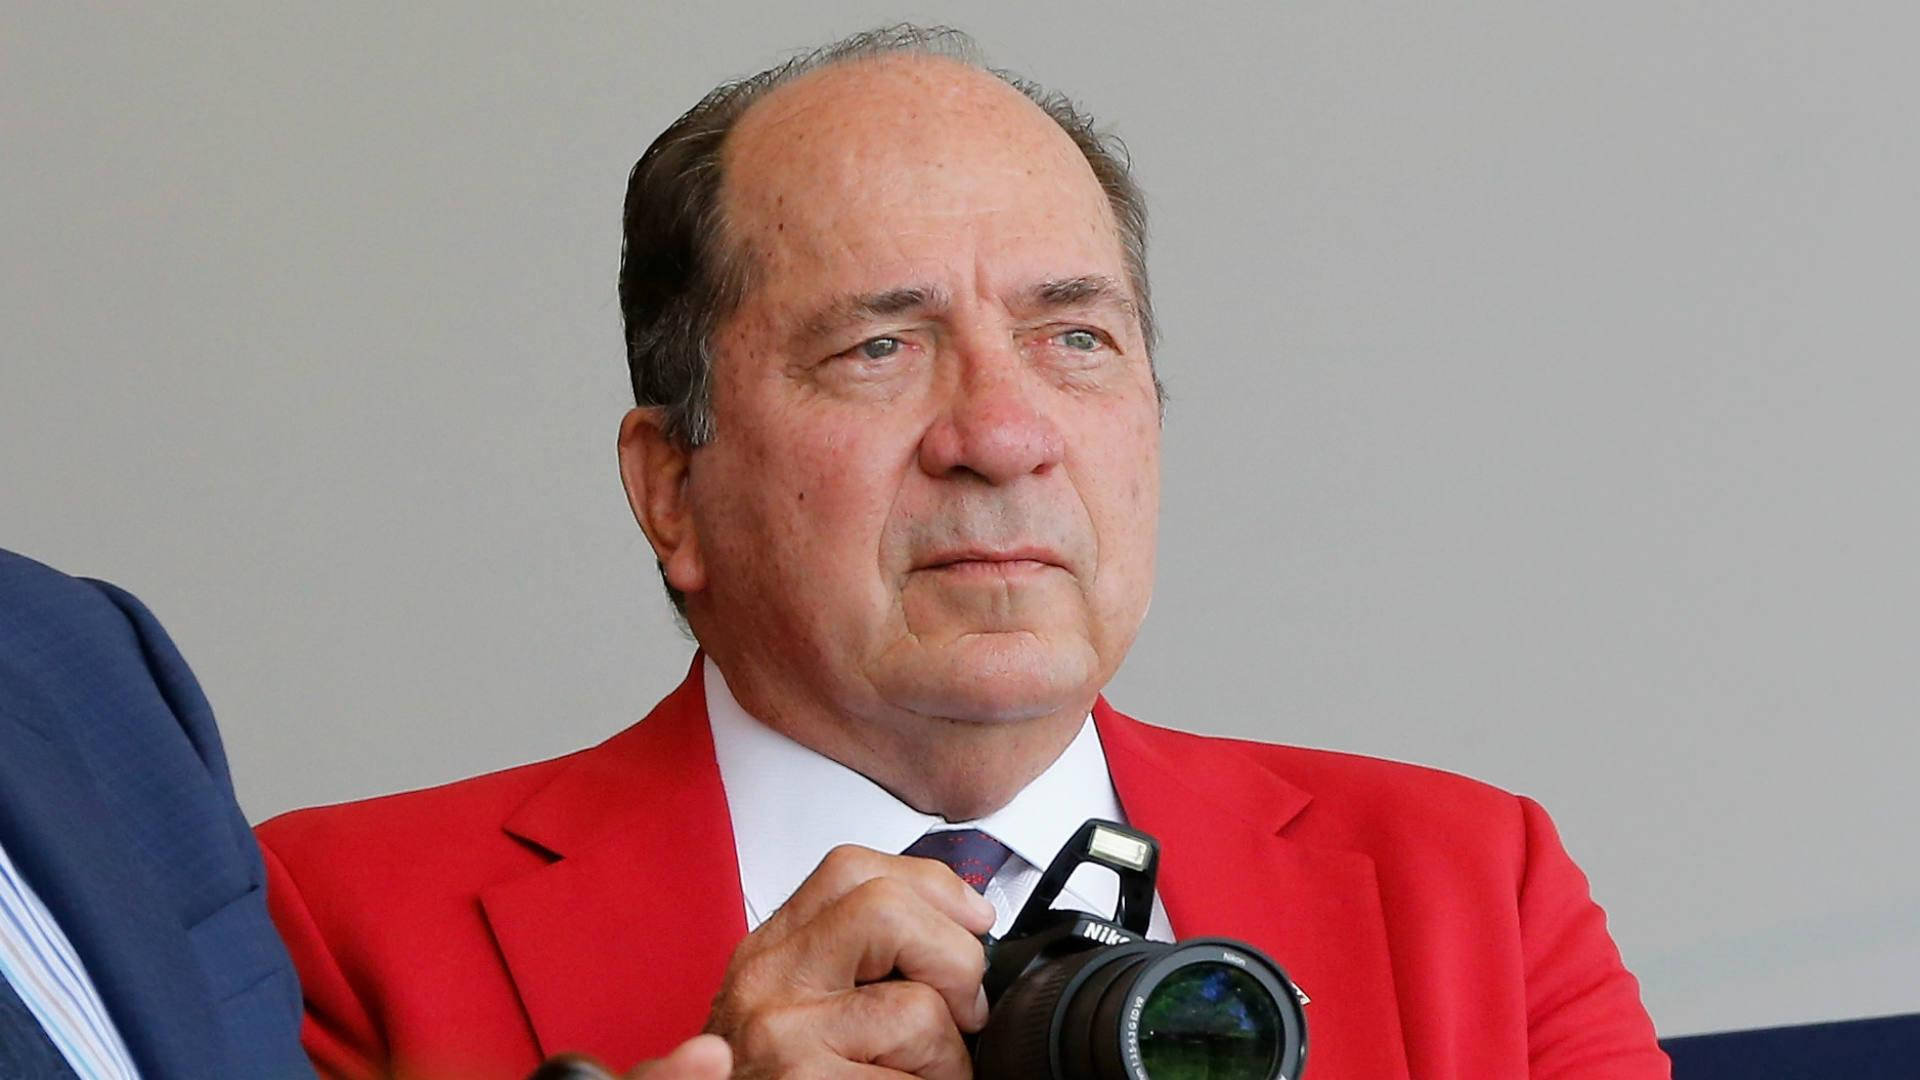 Johnny Bench With Camera Background